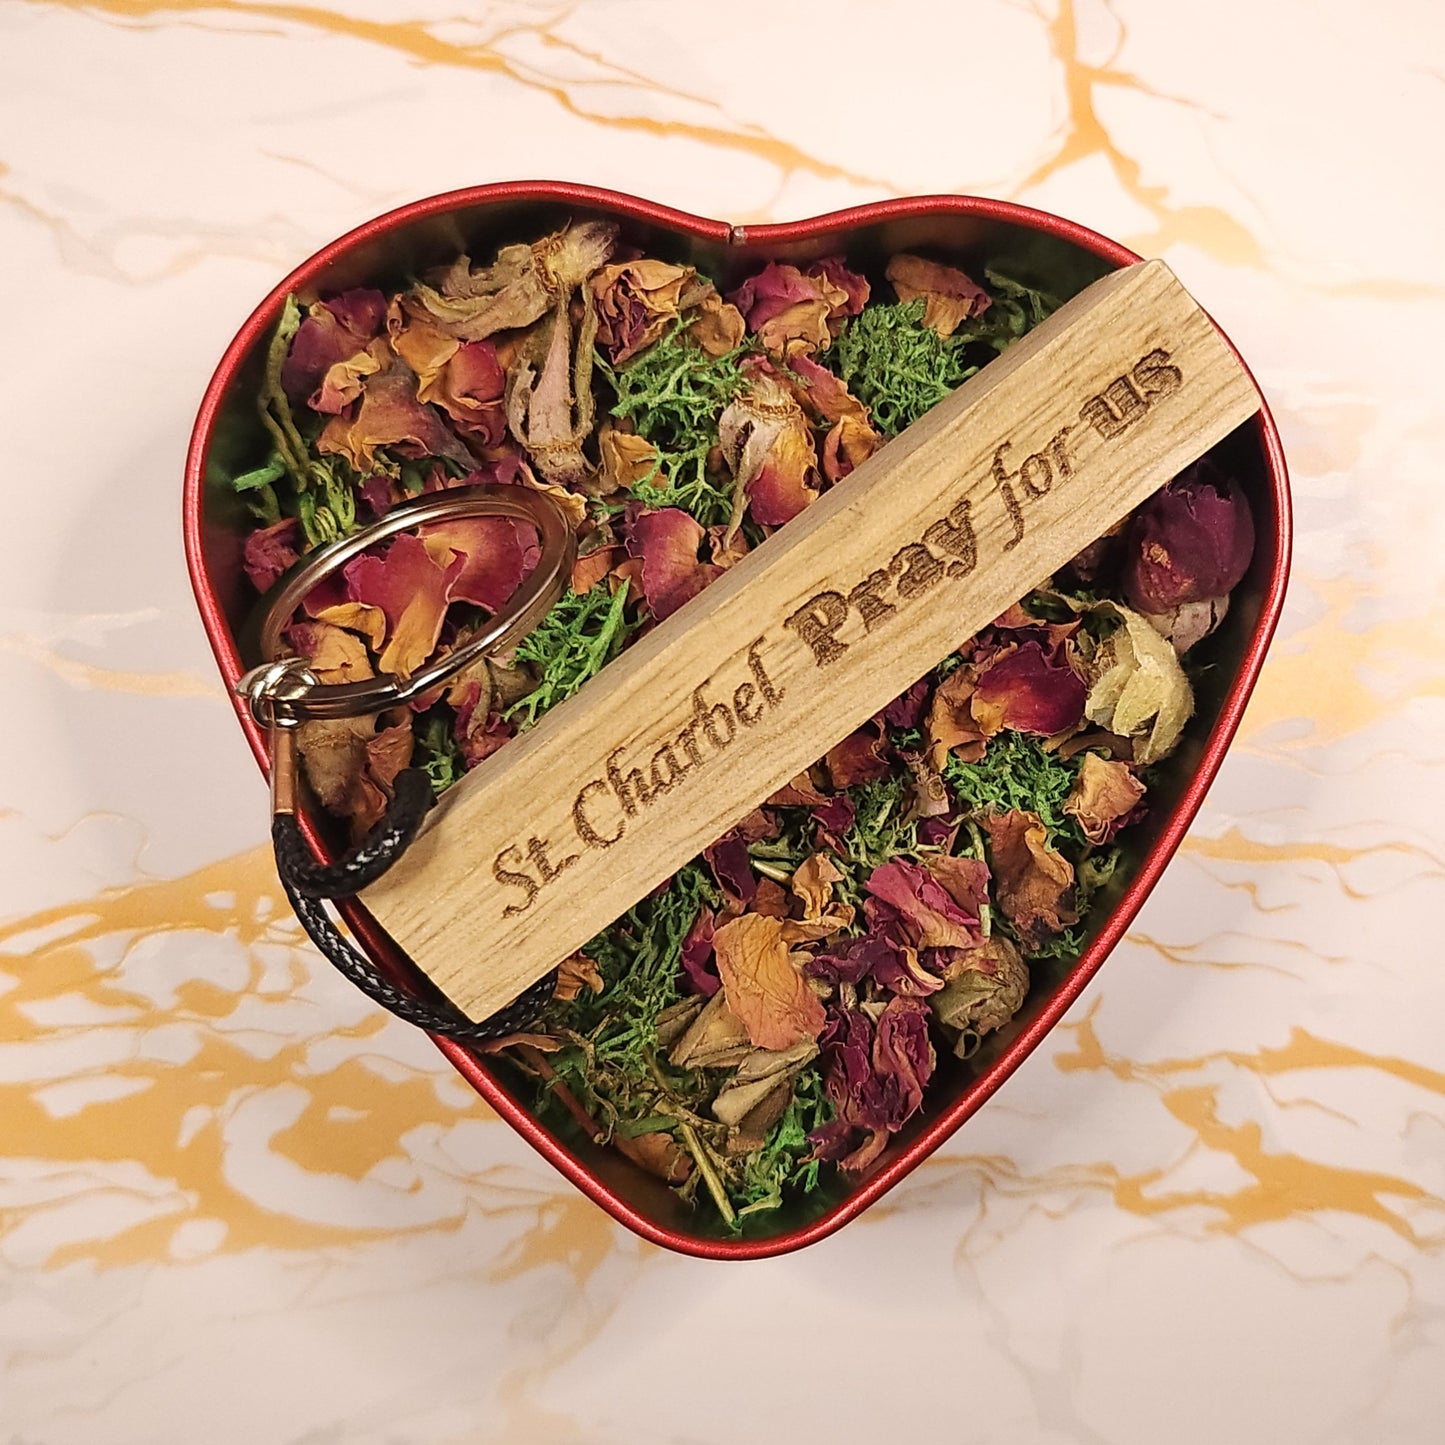 Saint Charbel - Valentine's Day Heart Box - Our Lady of Gifts